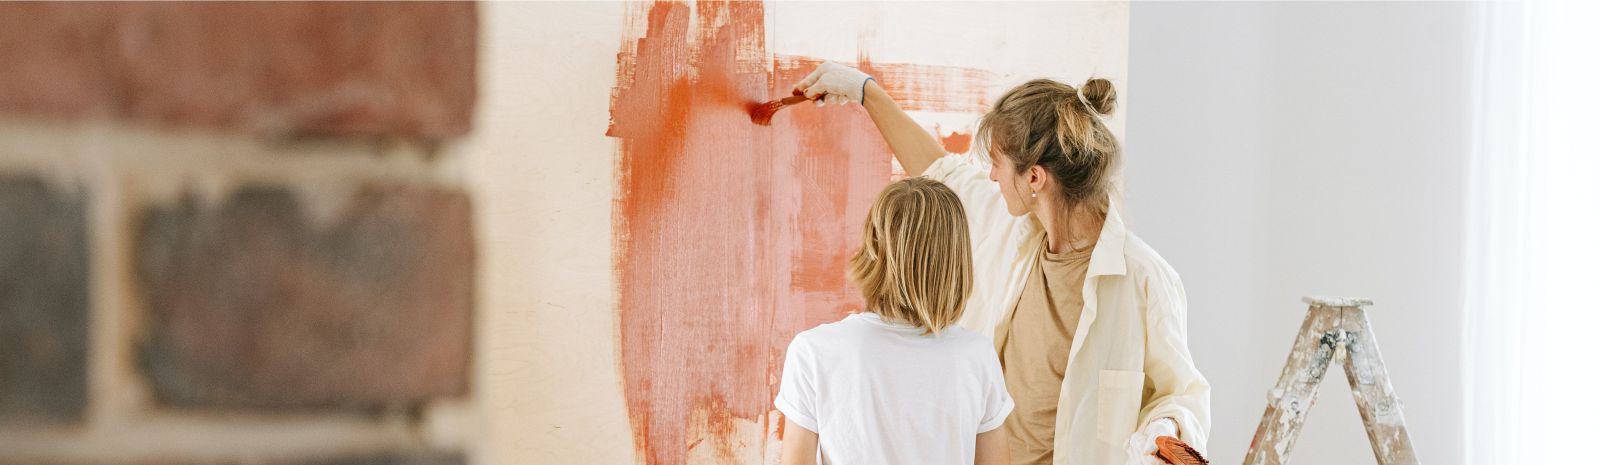 Woman and child painting wall.